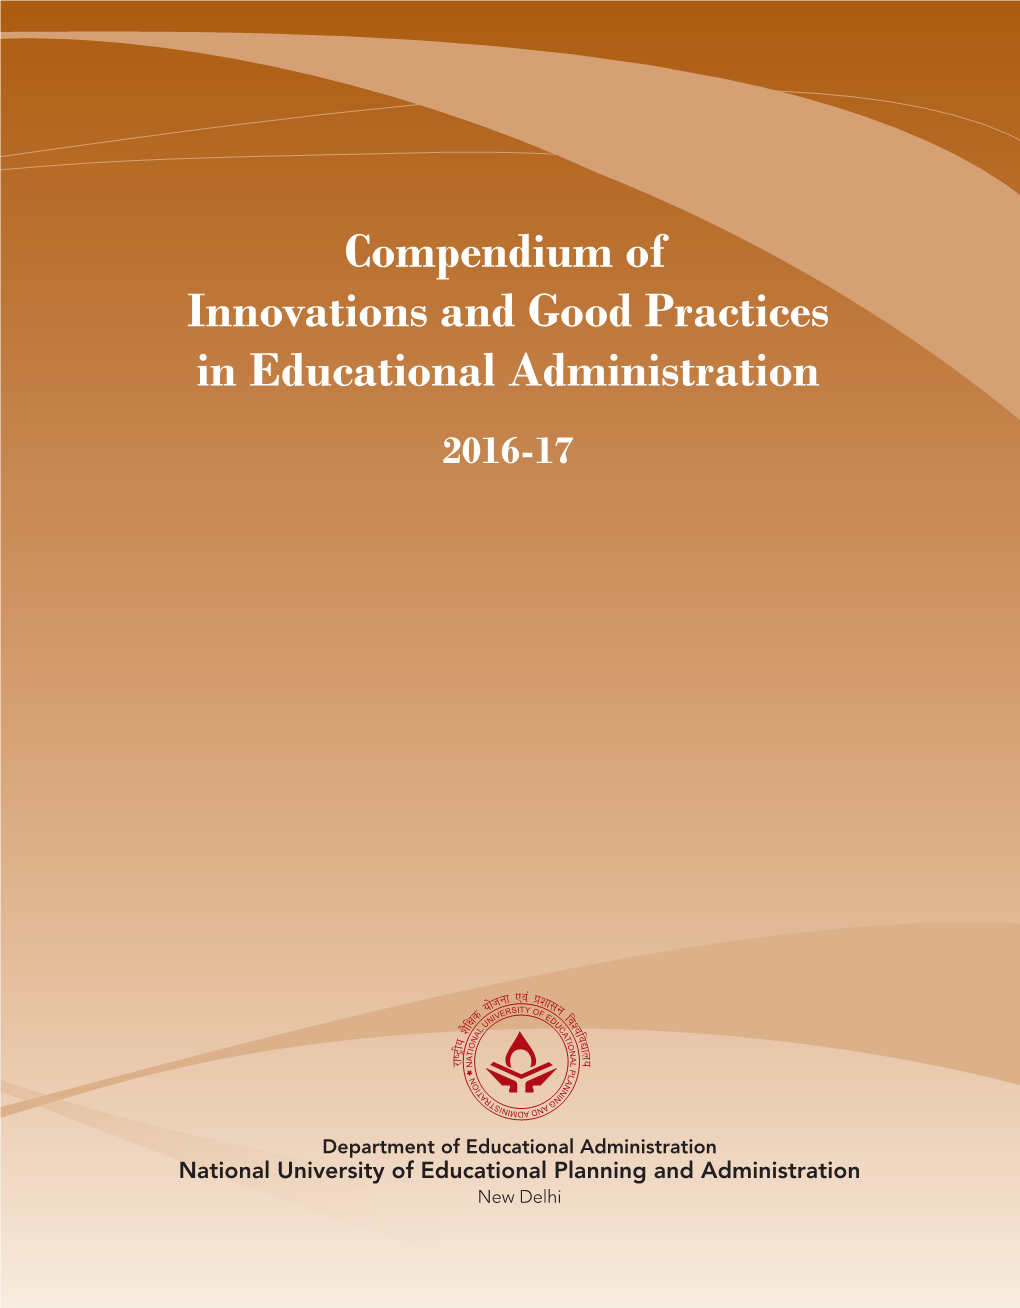 Compendium of Innovations and Good Practices in Educational